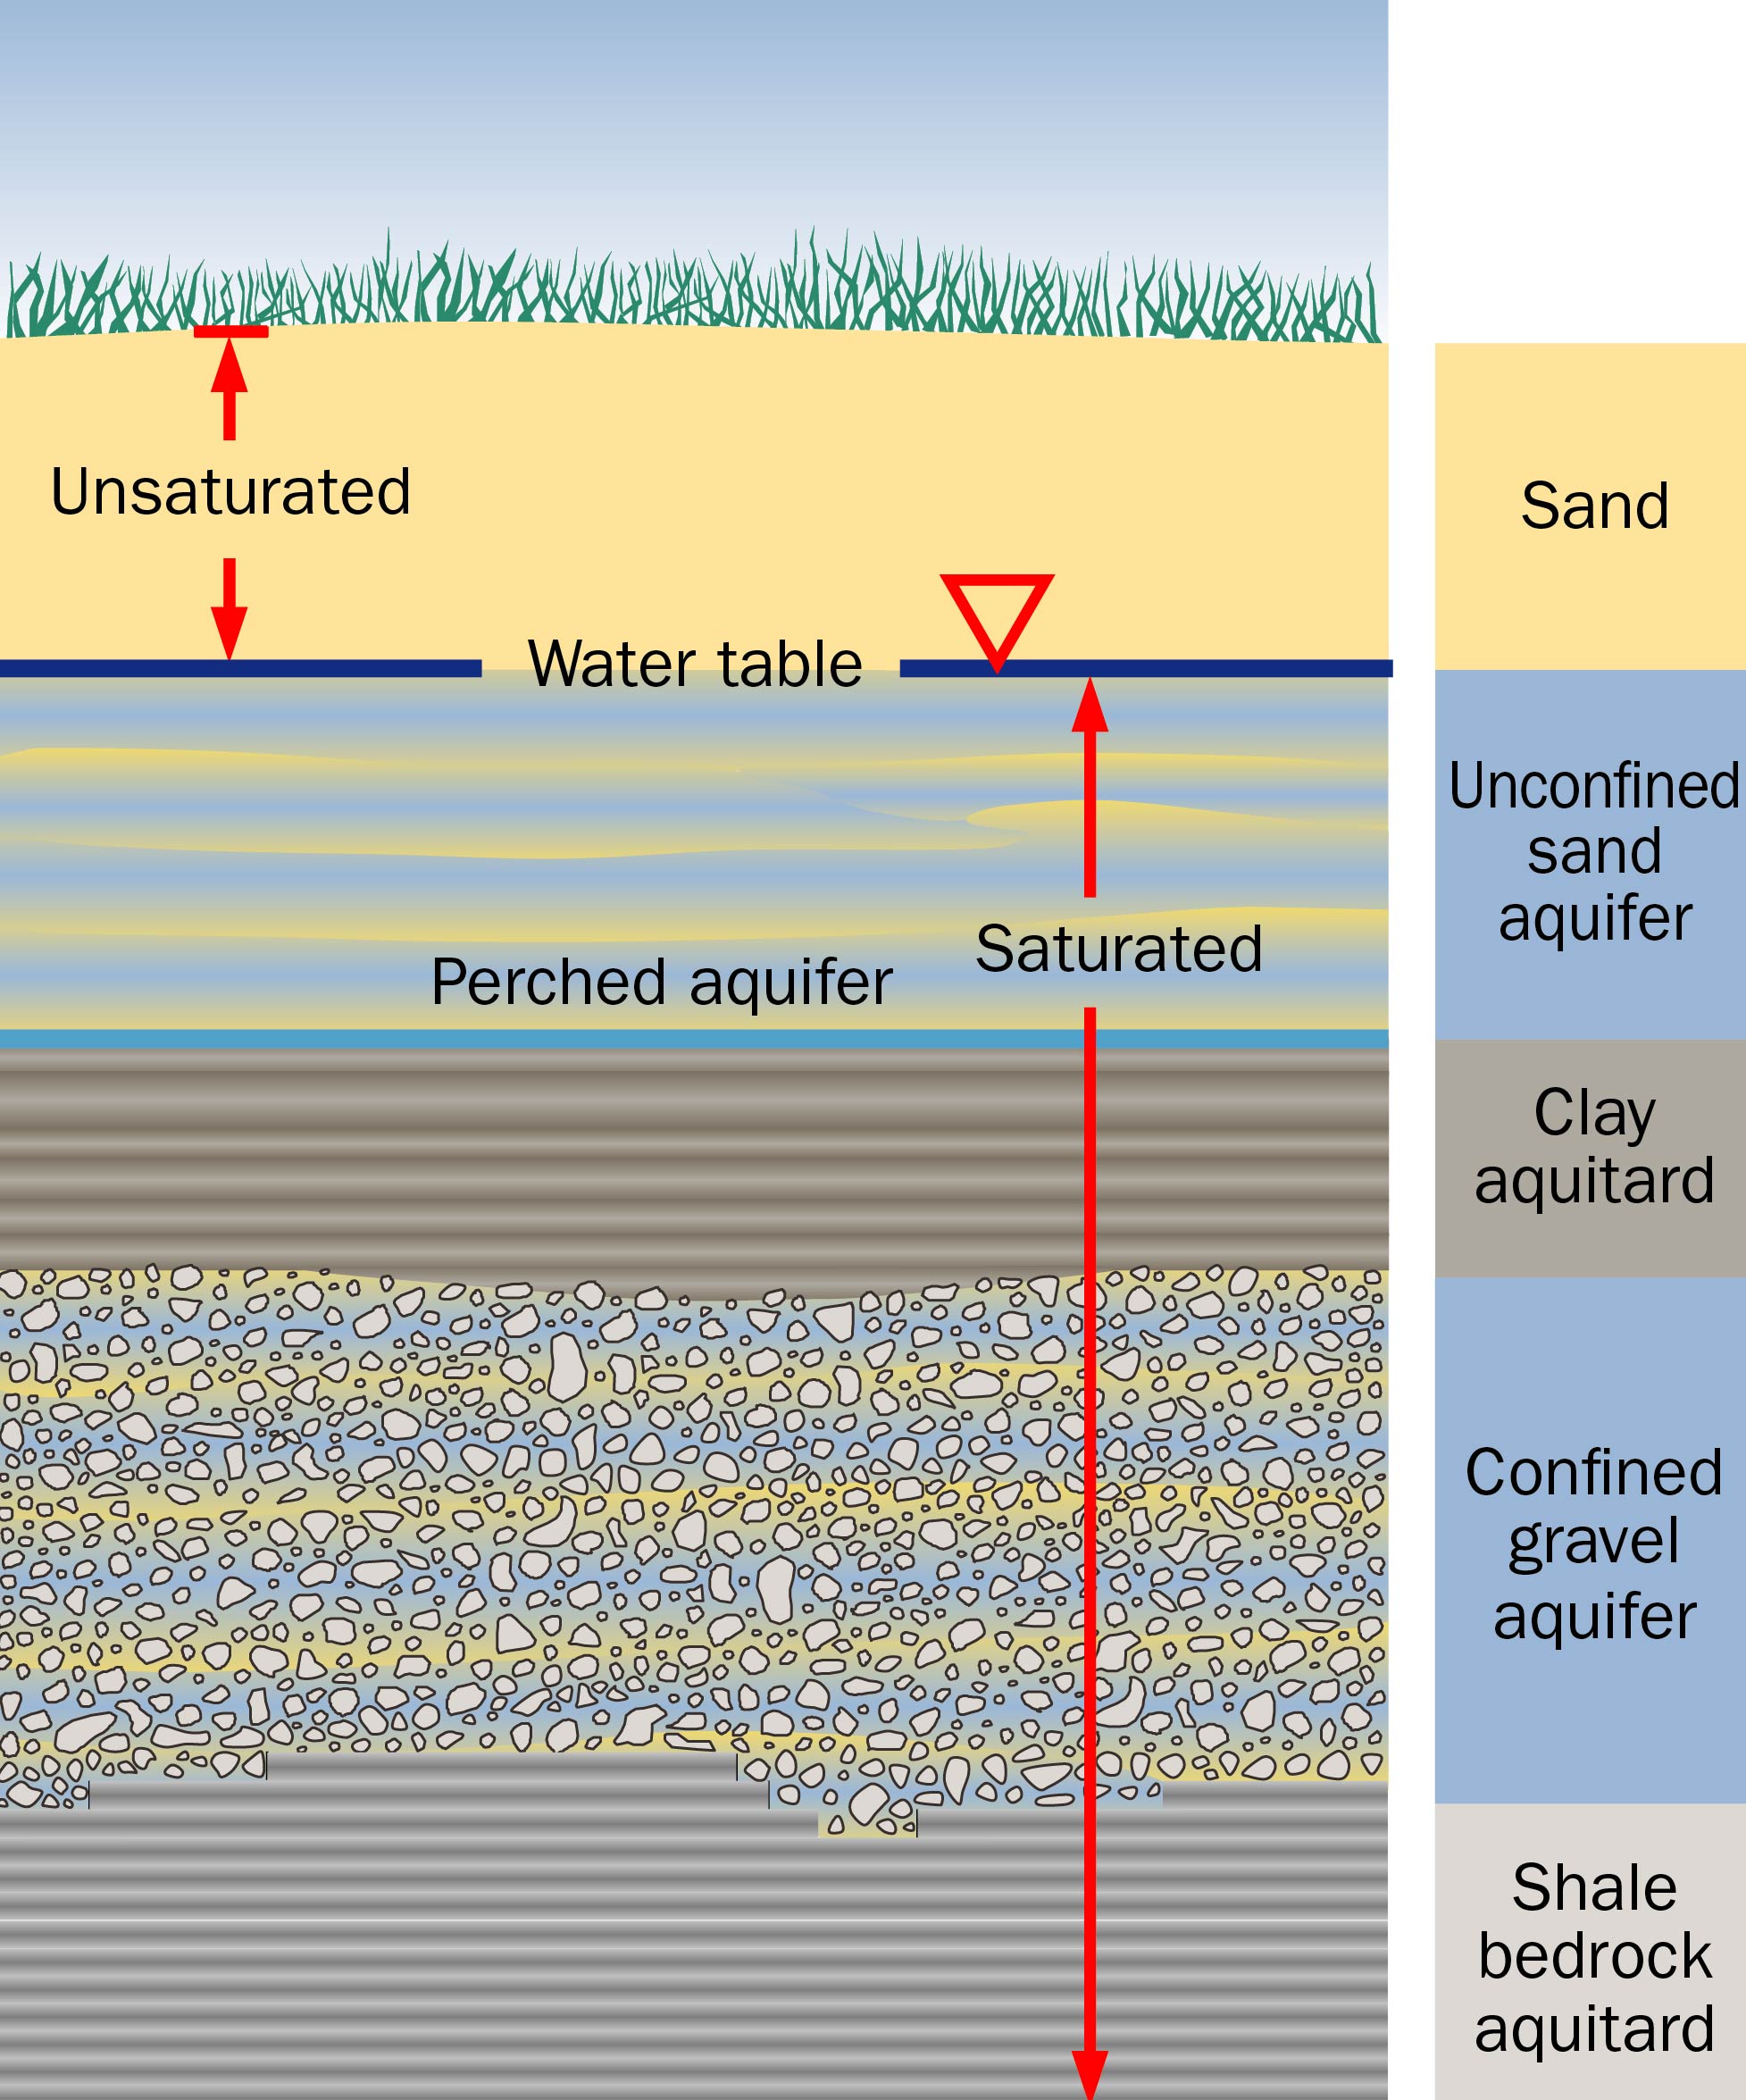 Various layers of saturated and unsaturated soil types that exist above and below the water table